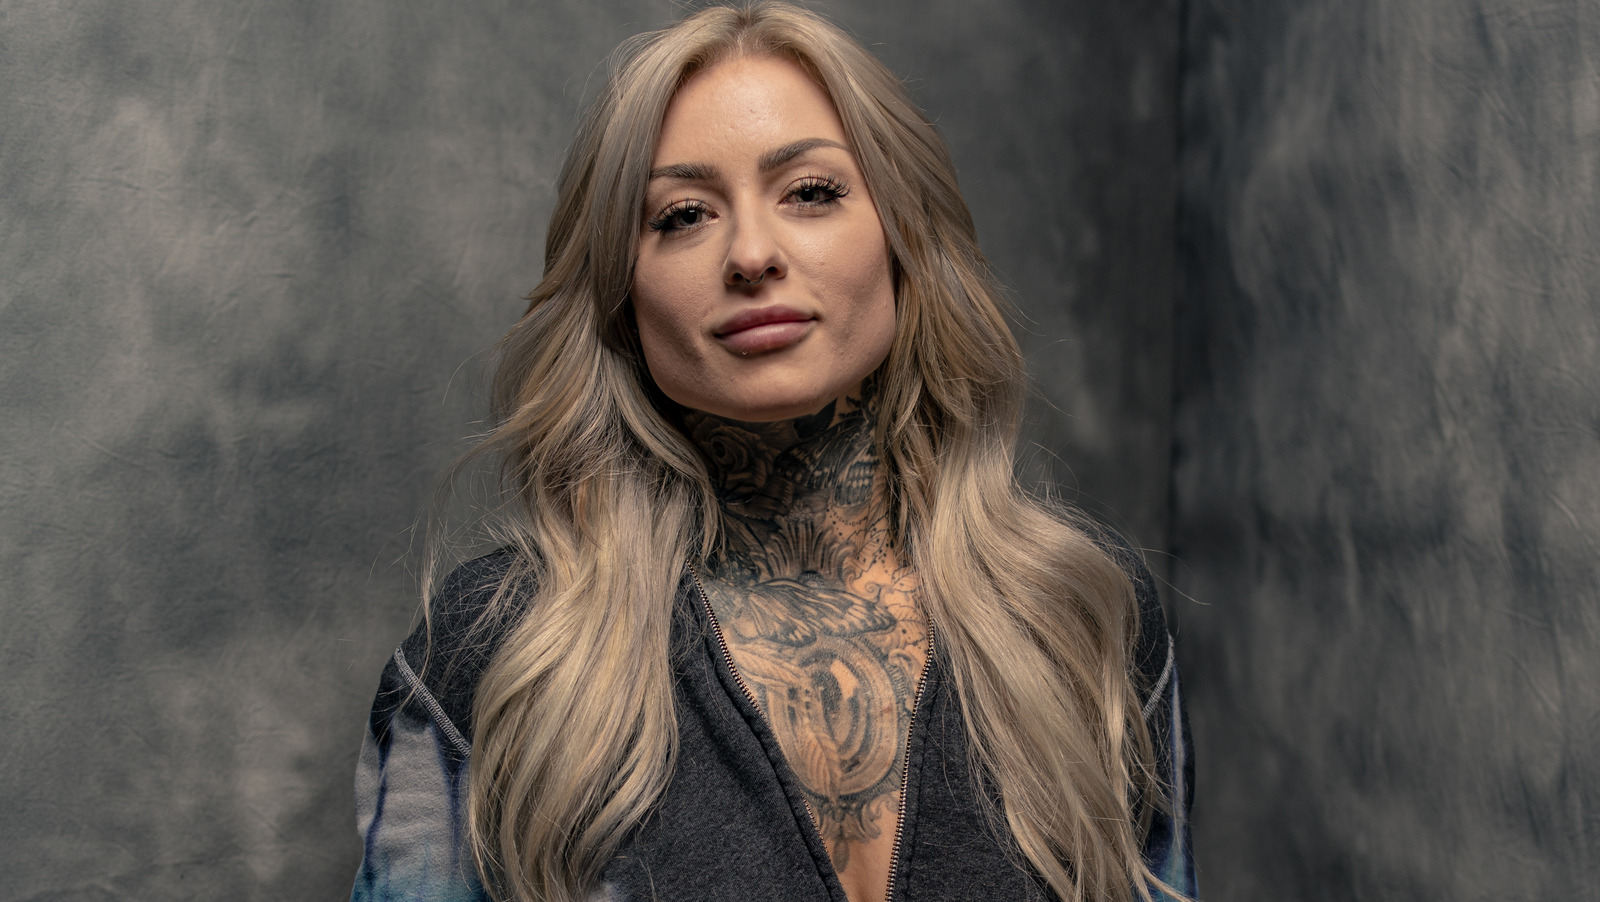 Ryan Ashley Malarkey exclusive: From oddities and tattoos to finding hidden  geniuses on Ink Master: Angels